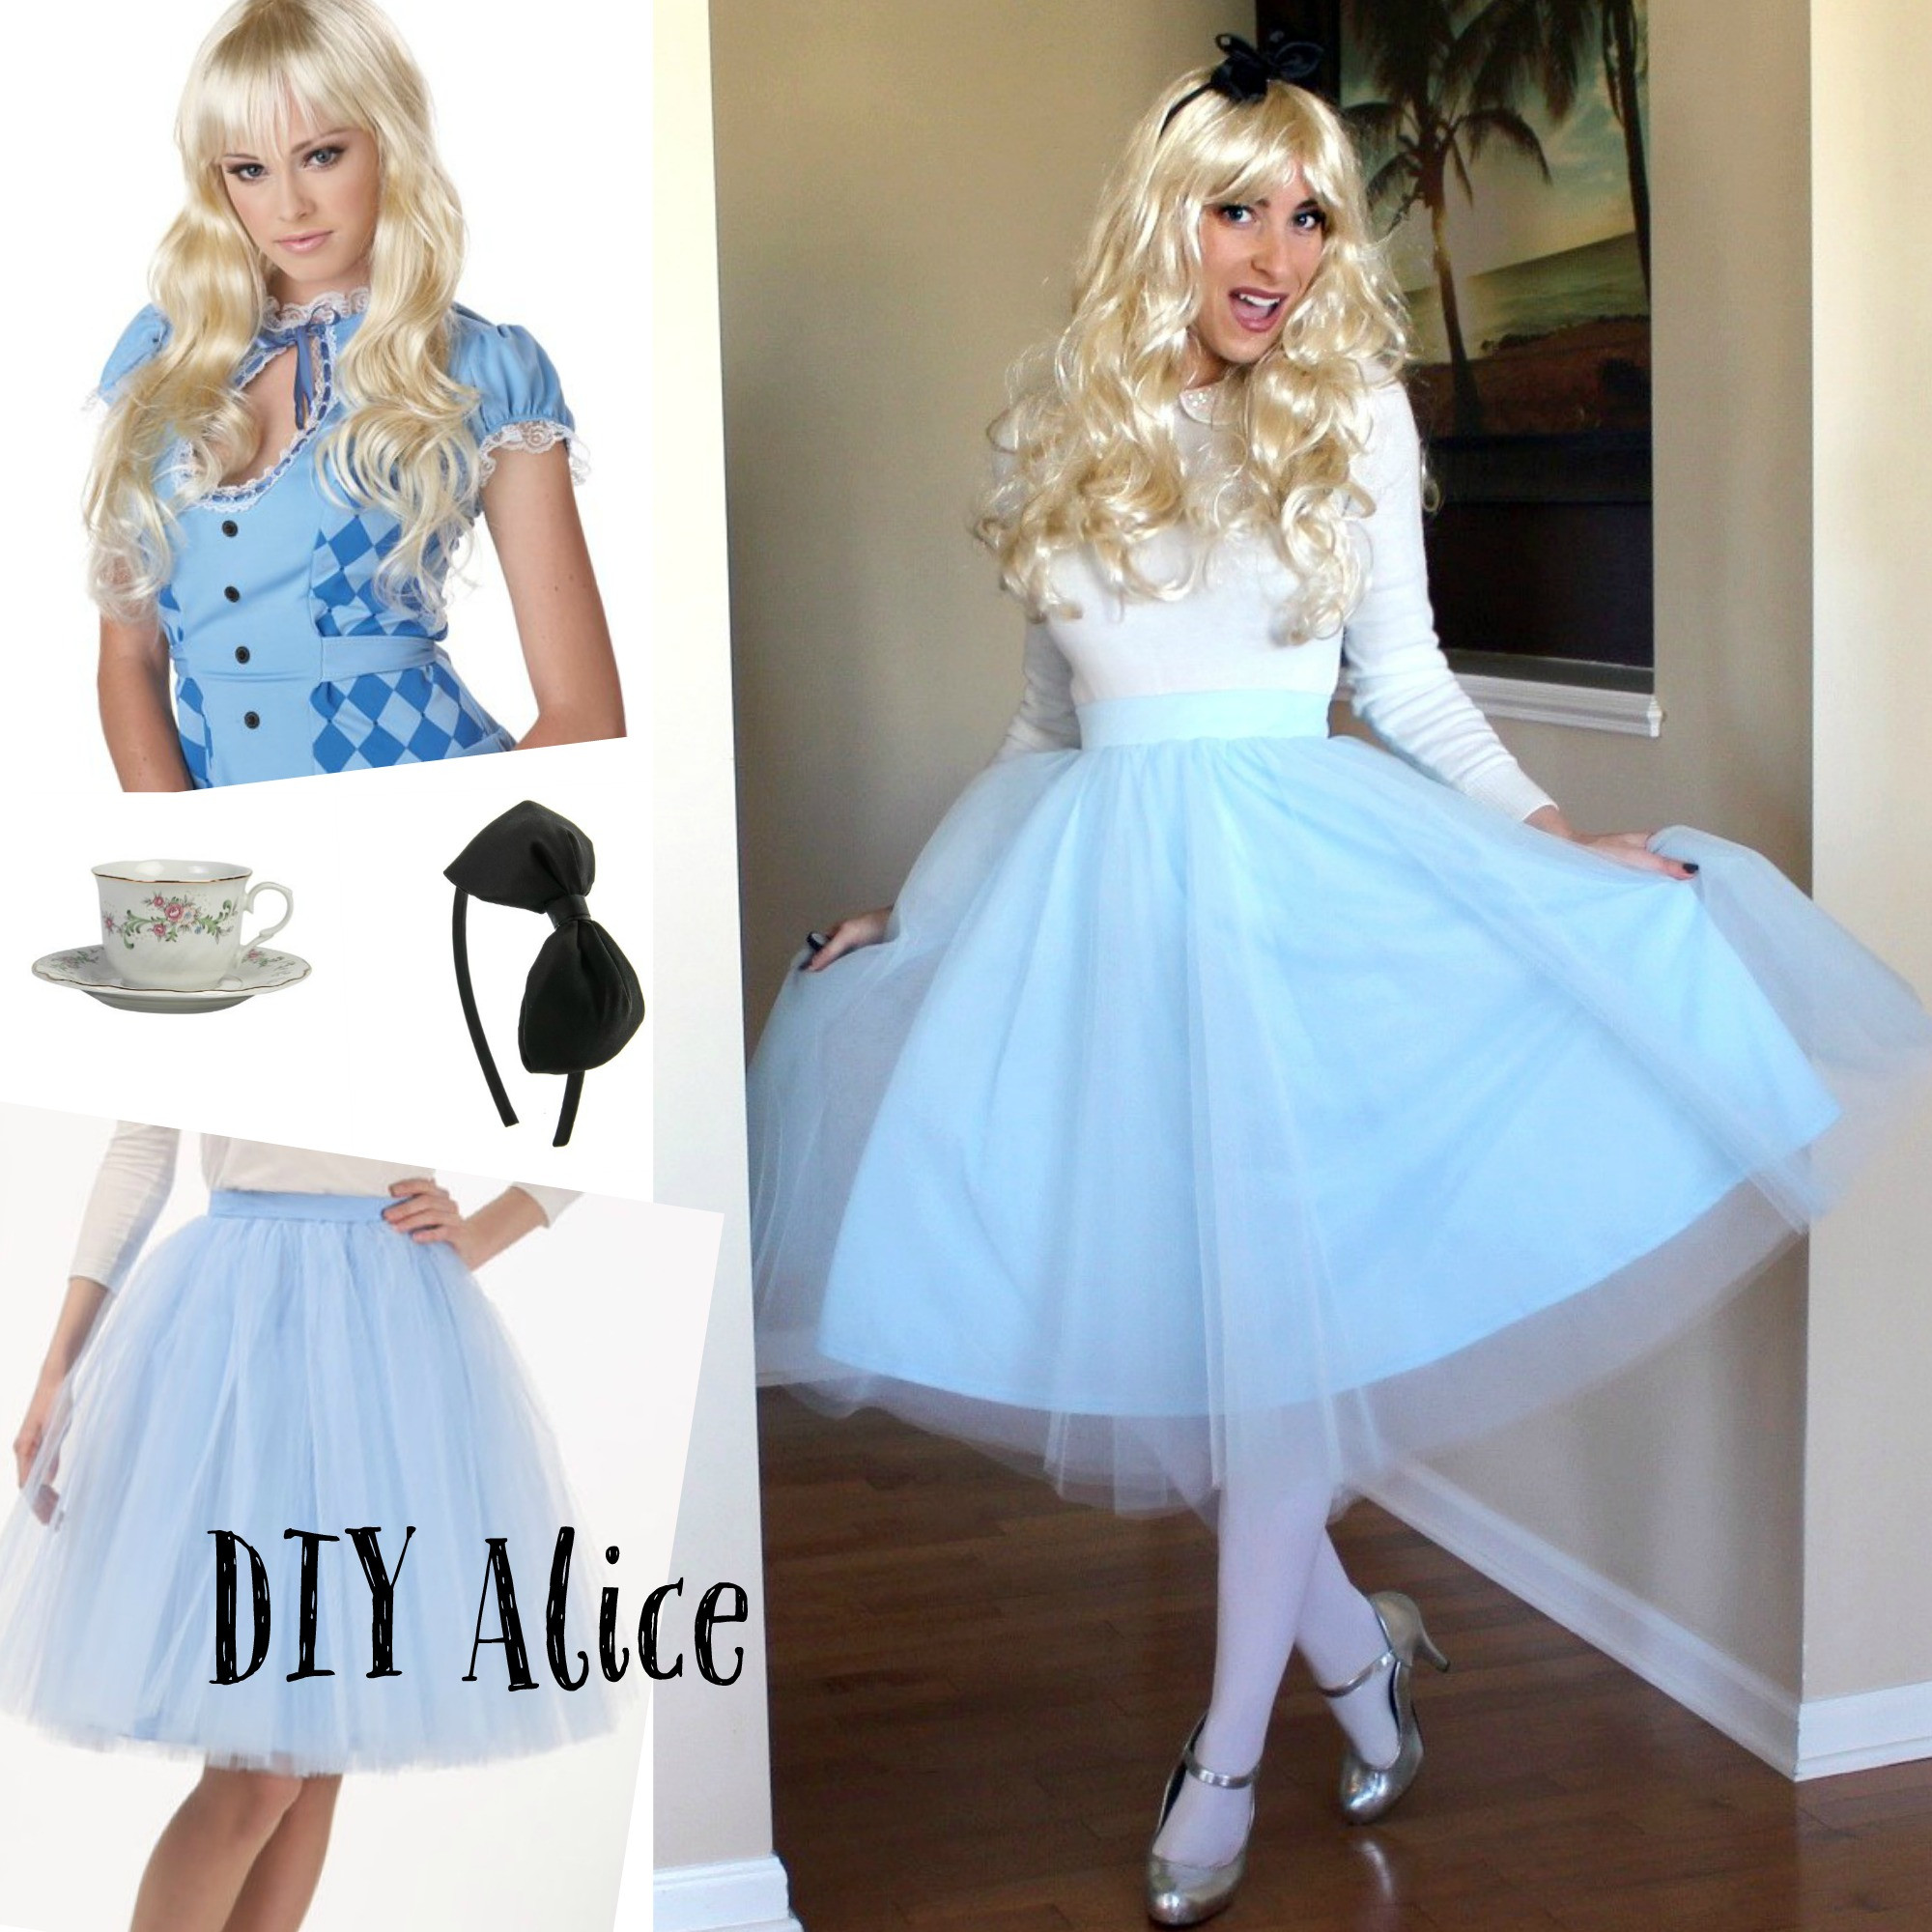 DIY Alice In Wonderland Costume Adults
 Pepperminting Blog Archive Minnie & Alice Easy DIY